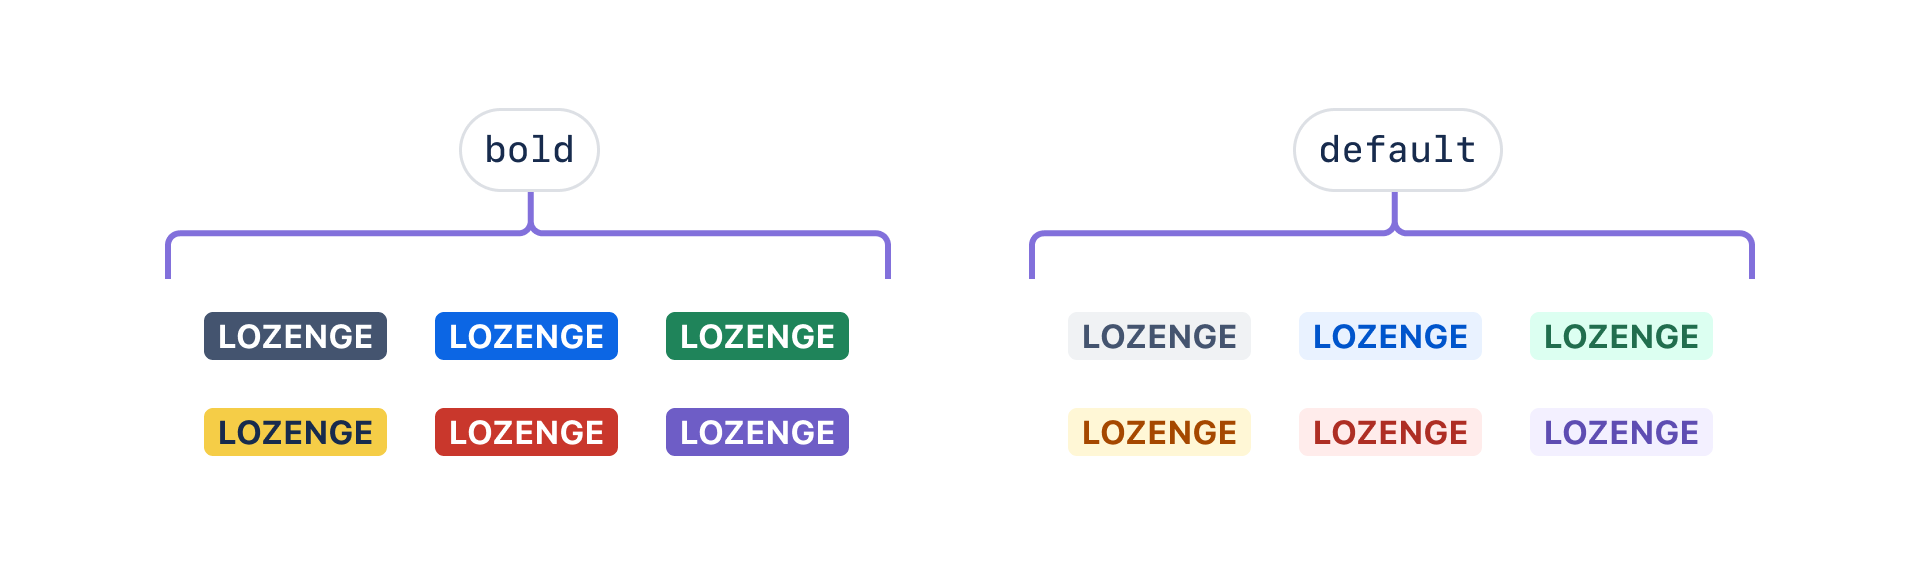 Comparing differences between bold and default lozenges. Bold lozenges have much more contrast than the default lozenges.